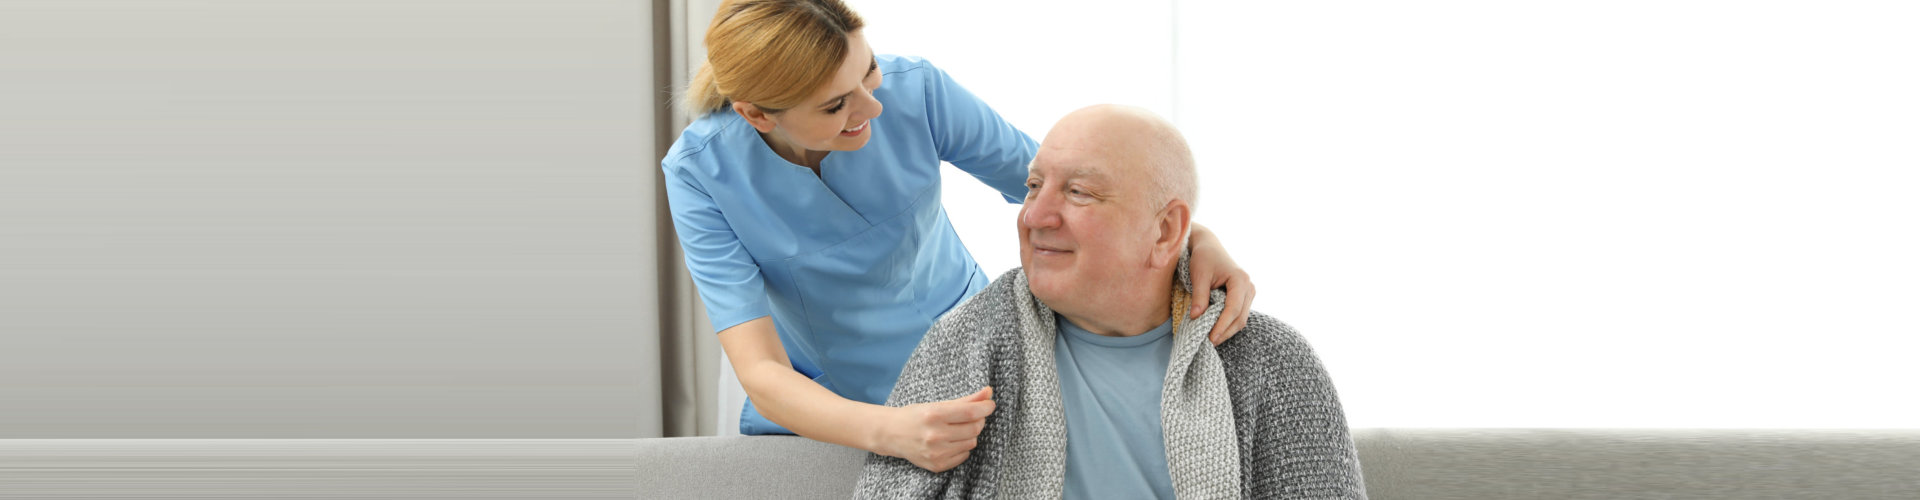 a caregiver woman looking at the elderly man